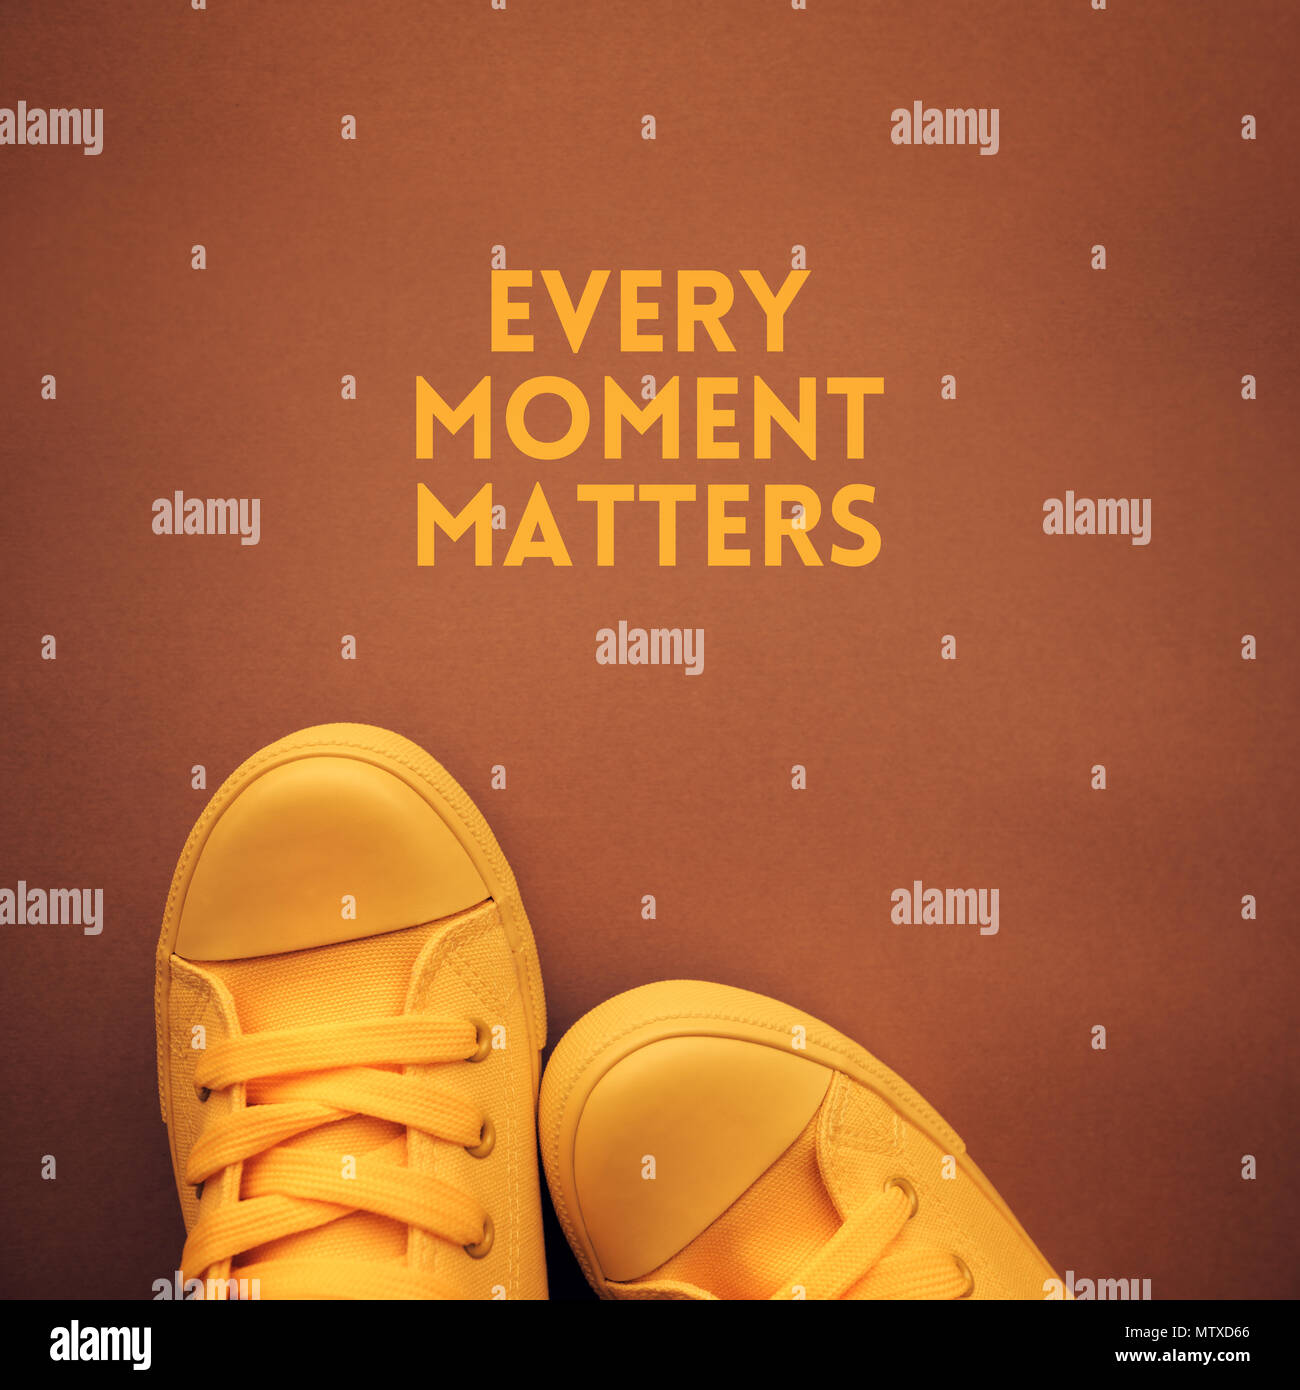 Every moment matters motivational quote, young person in casual canvas shoes standing over the text Stock Photo